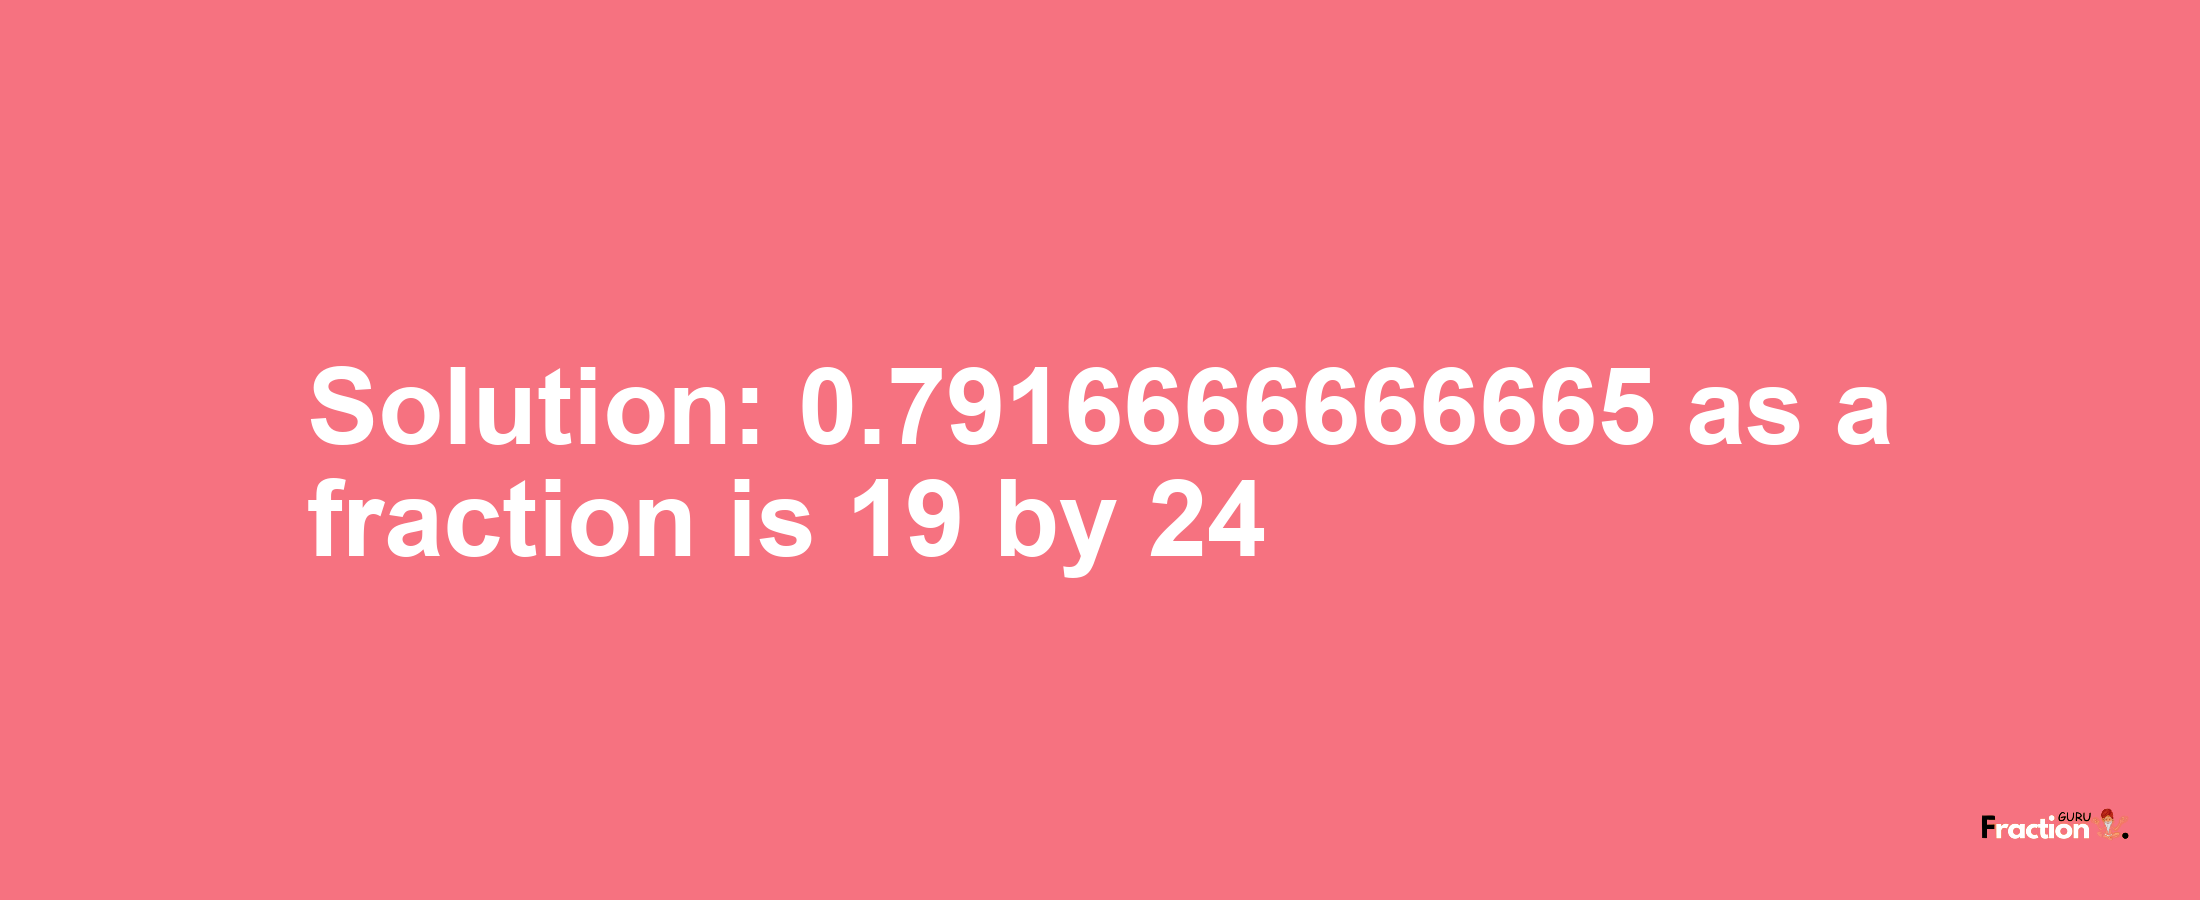 Solution:0.7916666666665 as a fraction is 19/24